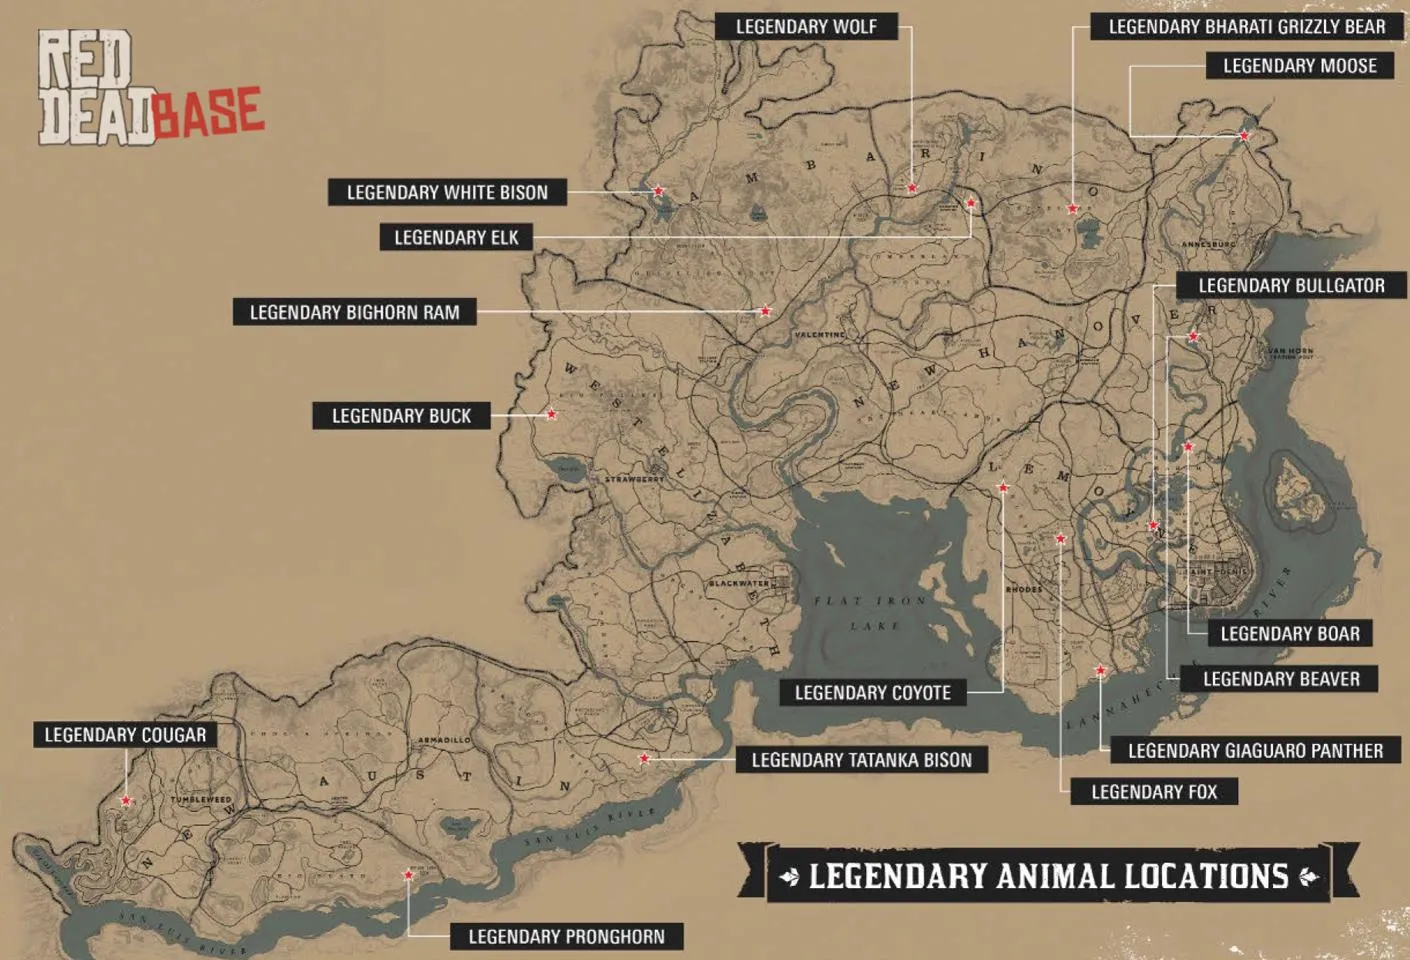 Legendary Coyote - Map Location in RDR2